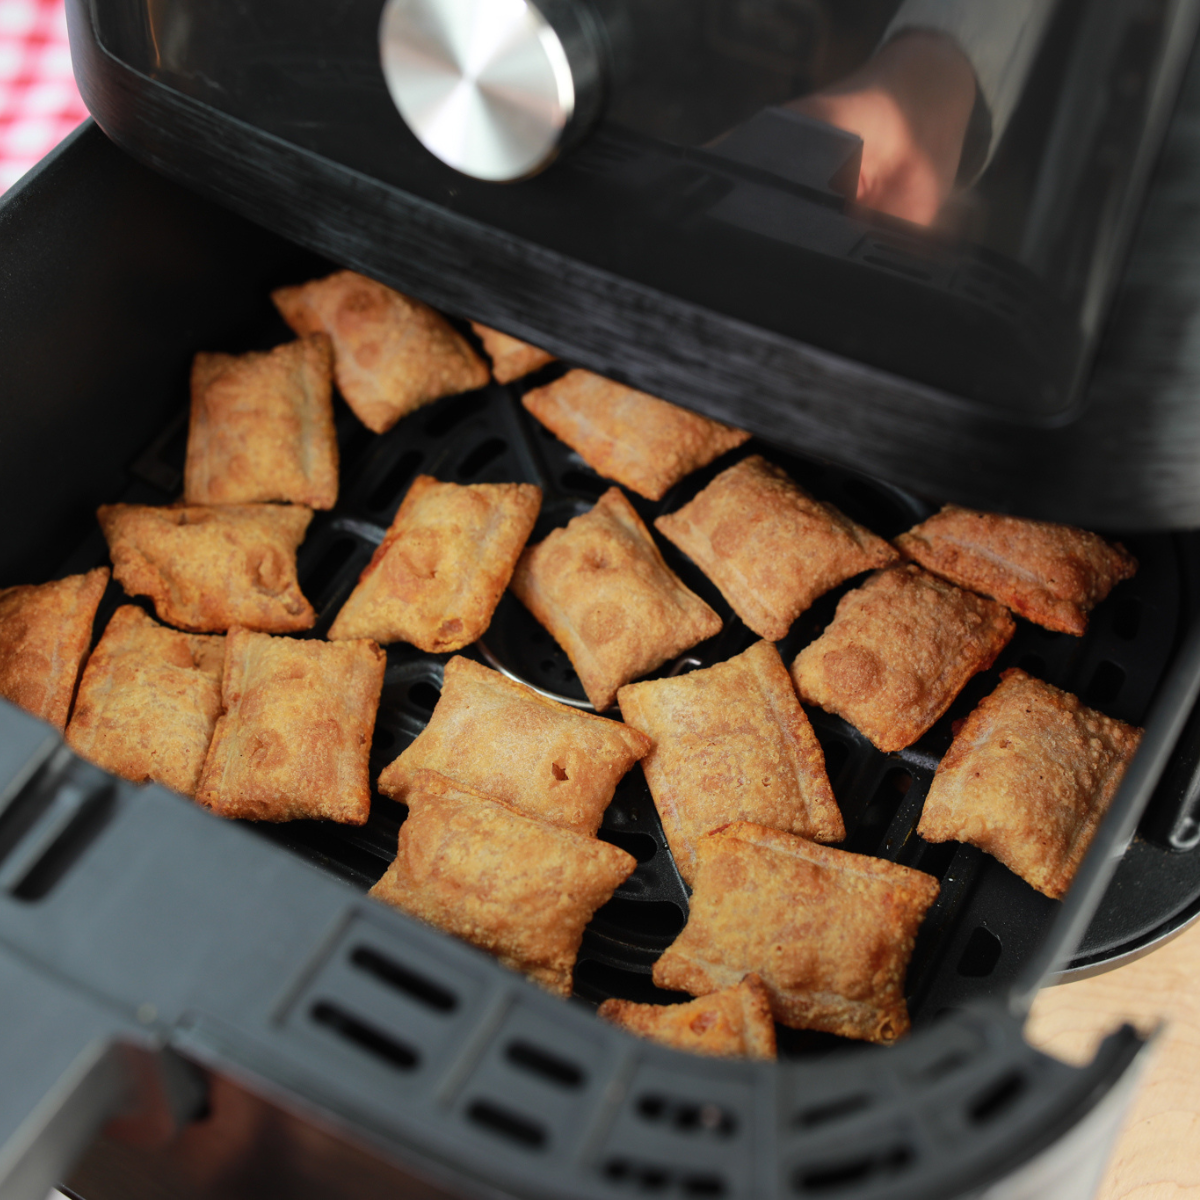 How To Cook Totitino's Pizza Rolls In Air Fryer